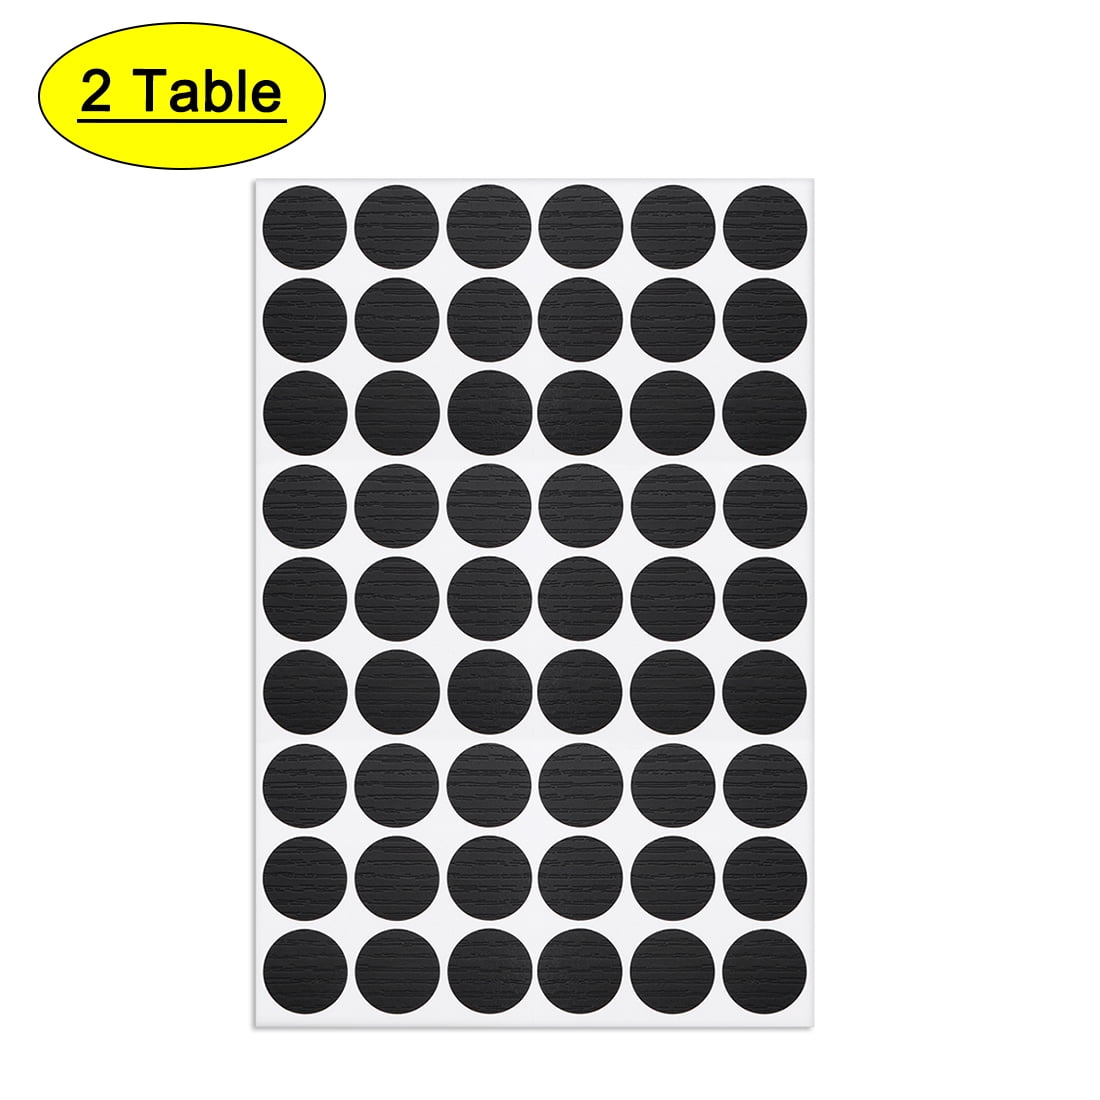 Details about    270Pcs Furniture Self-adhesive Screw Hole Caps Covers Stickers 21mm Diameter 